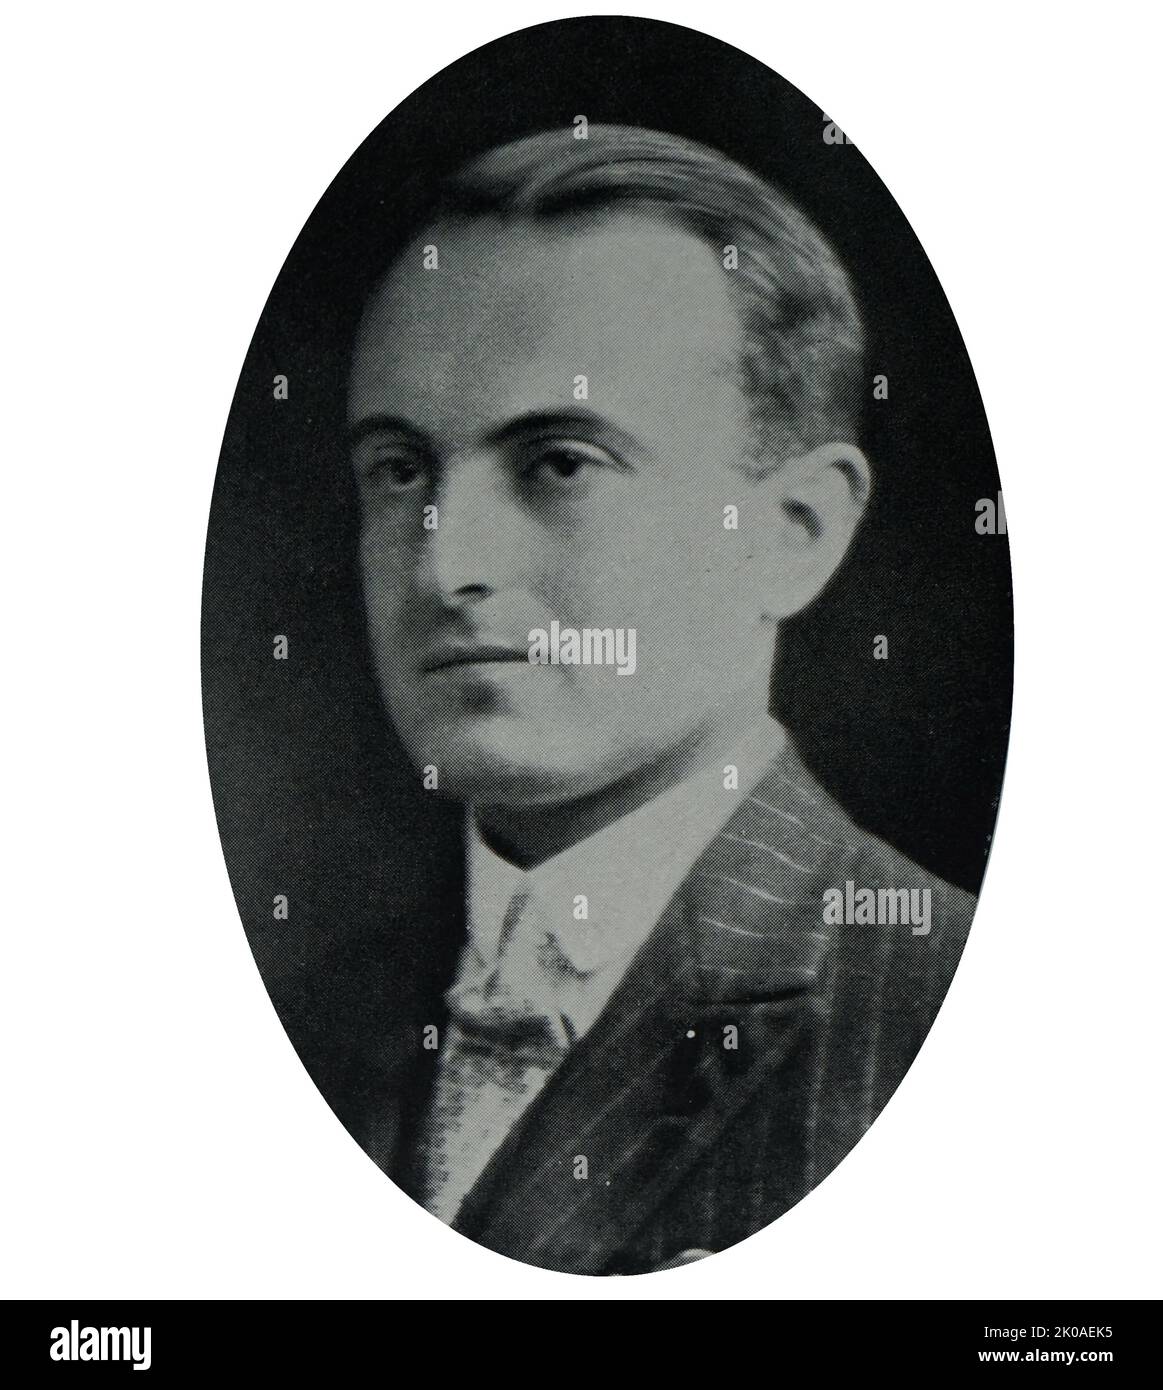 Prince Paul of Yugoslavia, also known as Paul Karadordevic (1893 - 1976), was prince regent of the Kingdom of Yugoslavia during the minority of King Peter II. Paul was a first cousin of Peter's father Alexander I Stock Photo